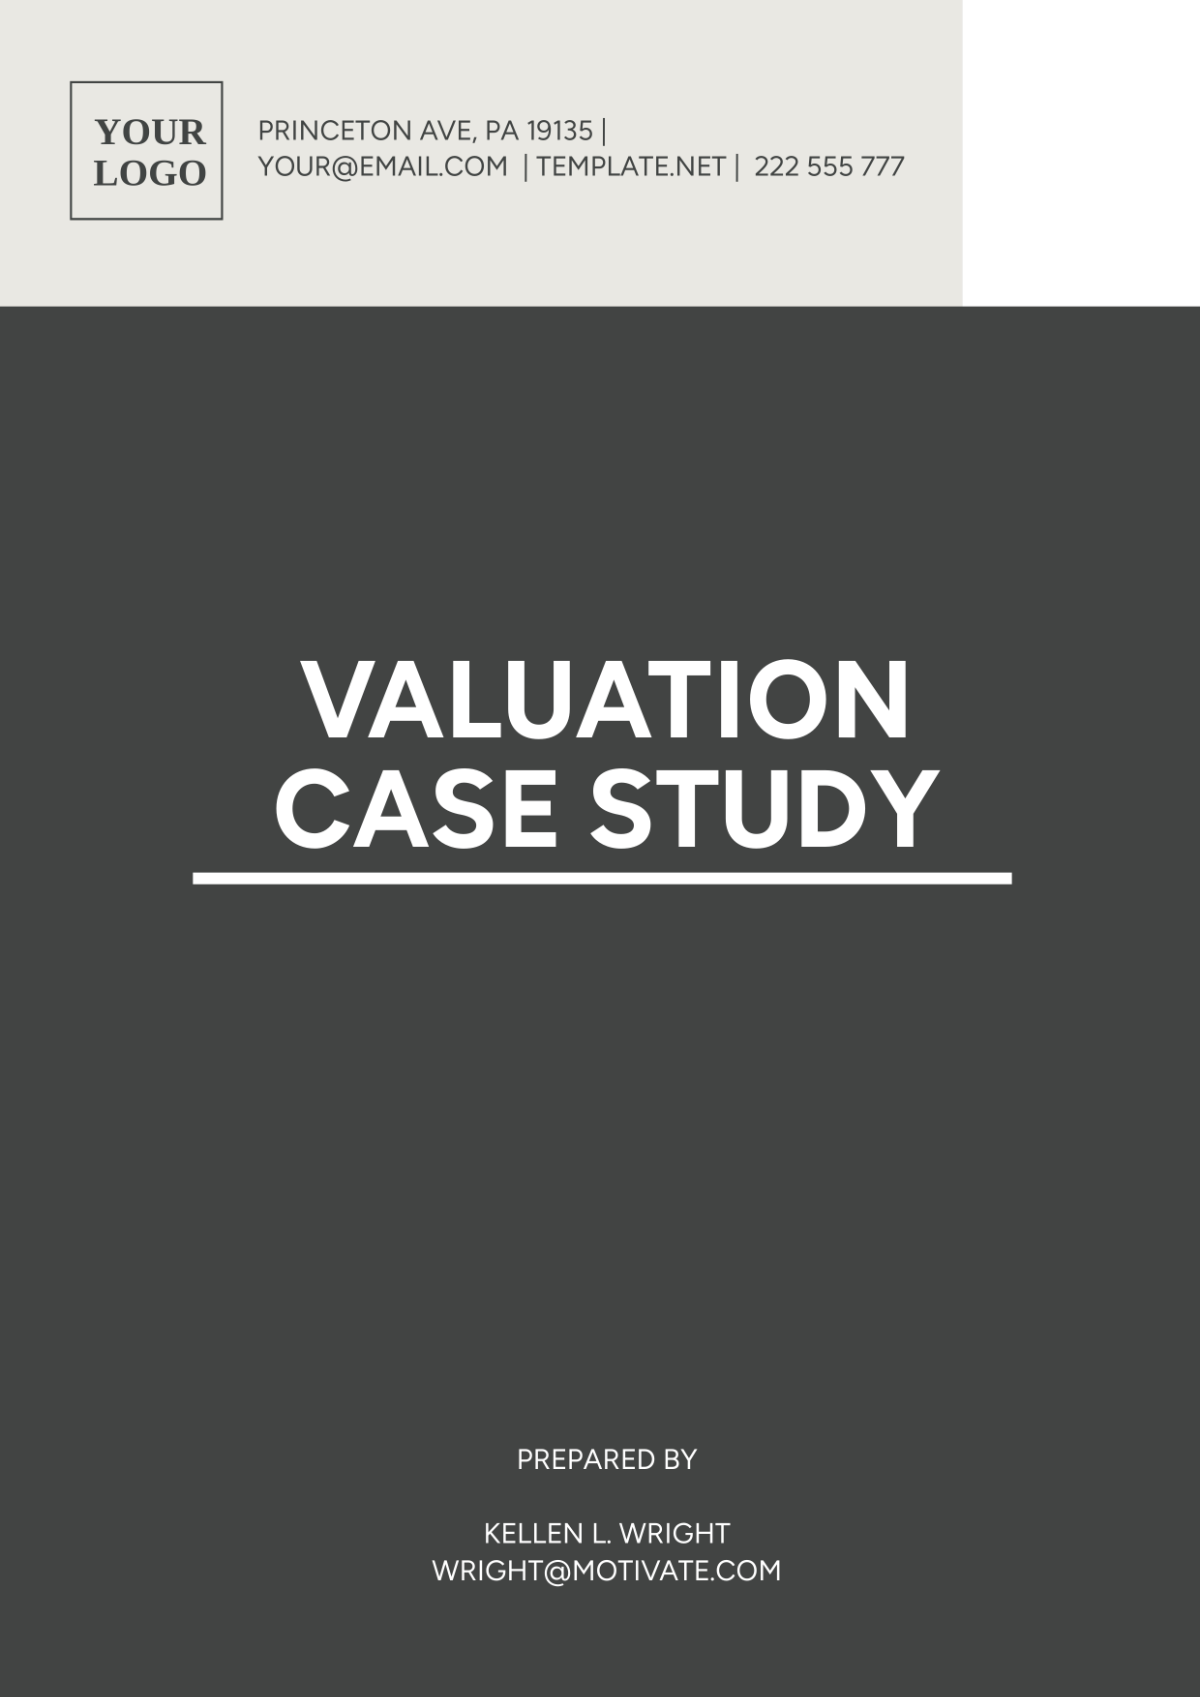 Valuation Case Study Template